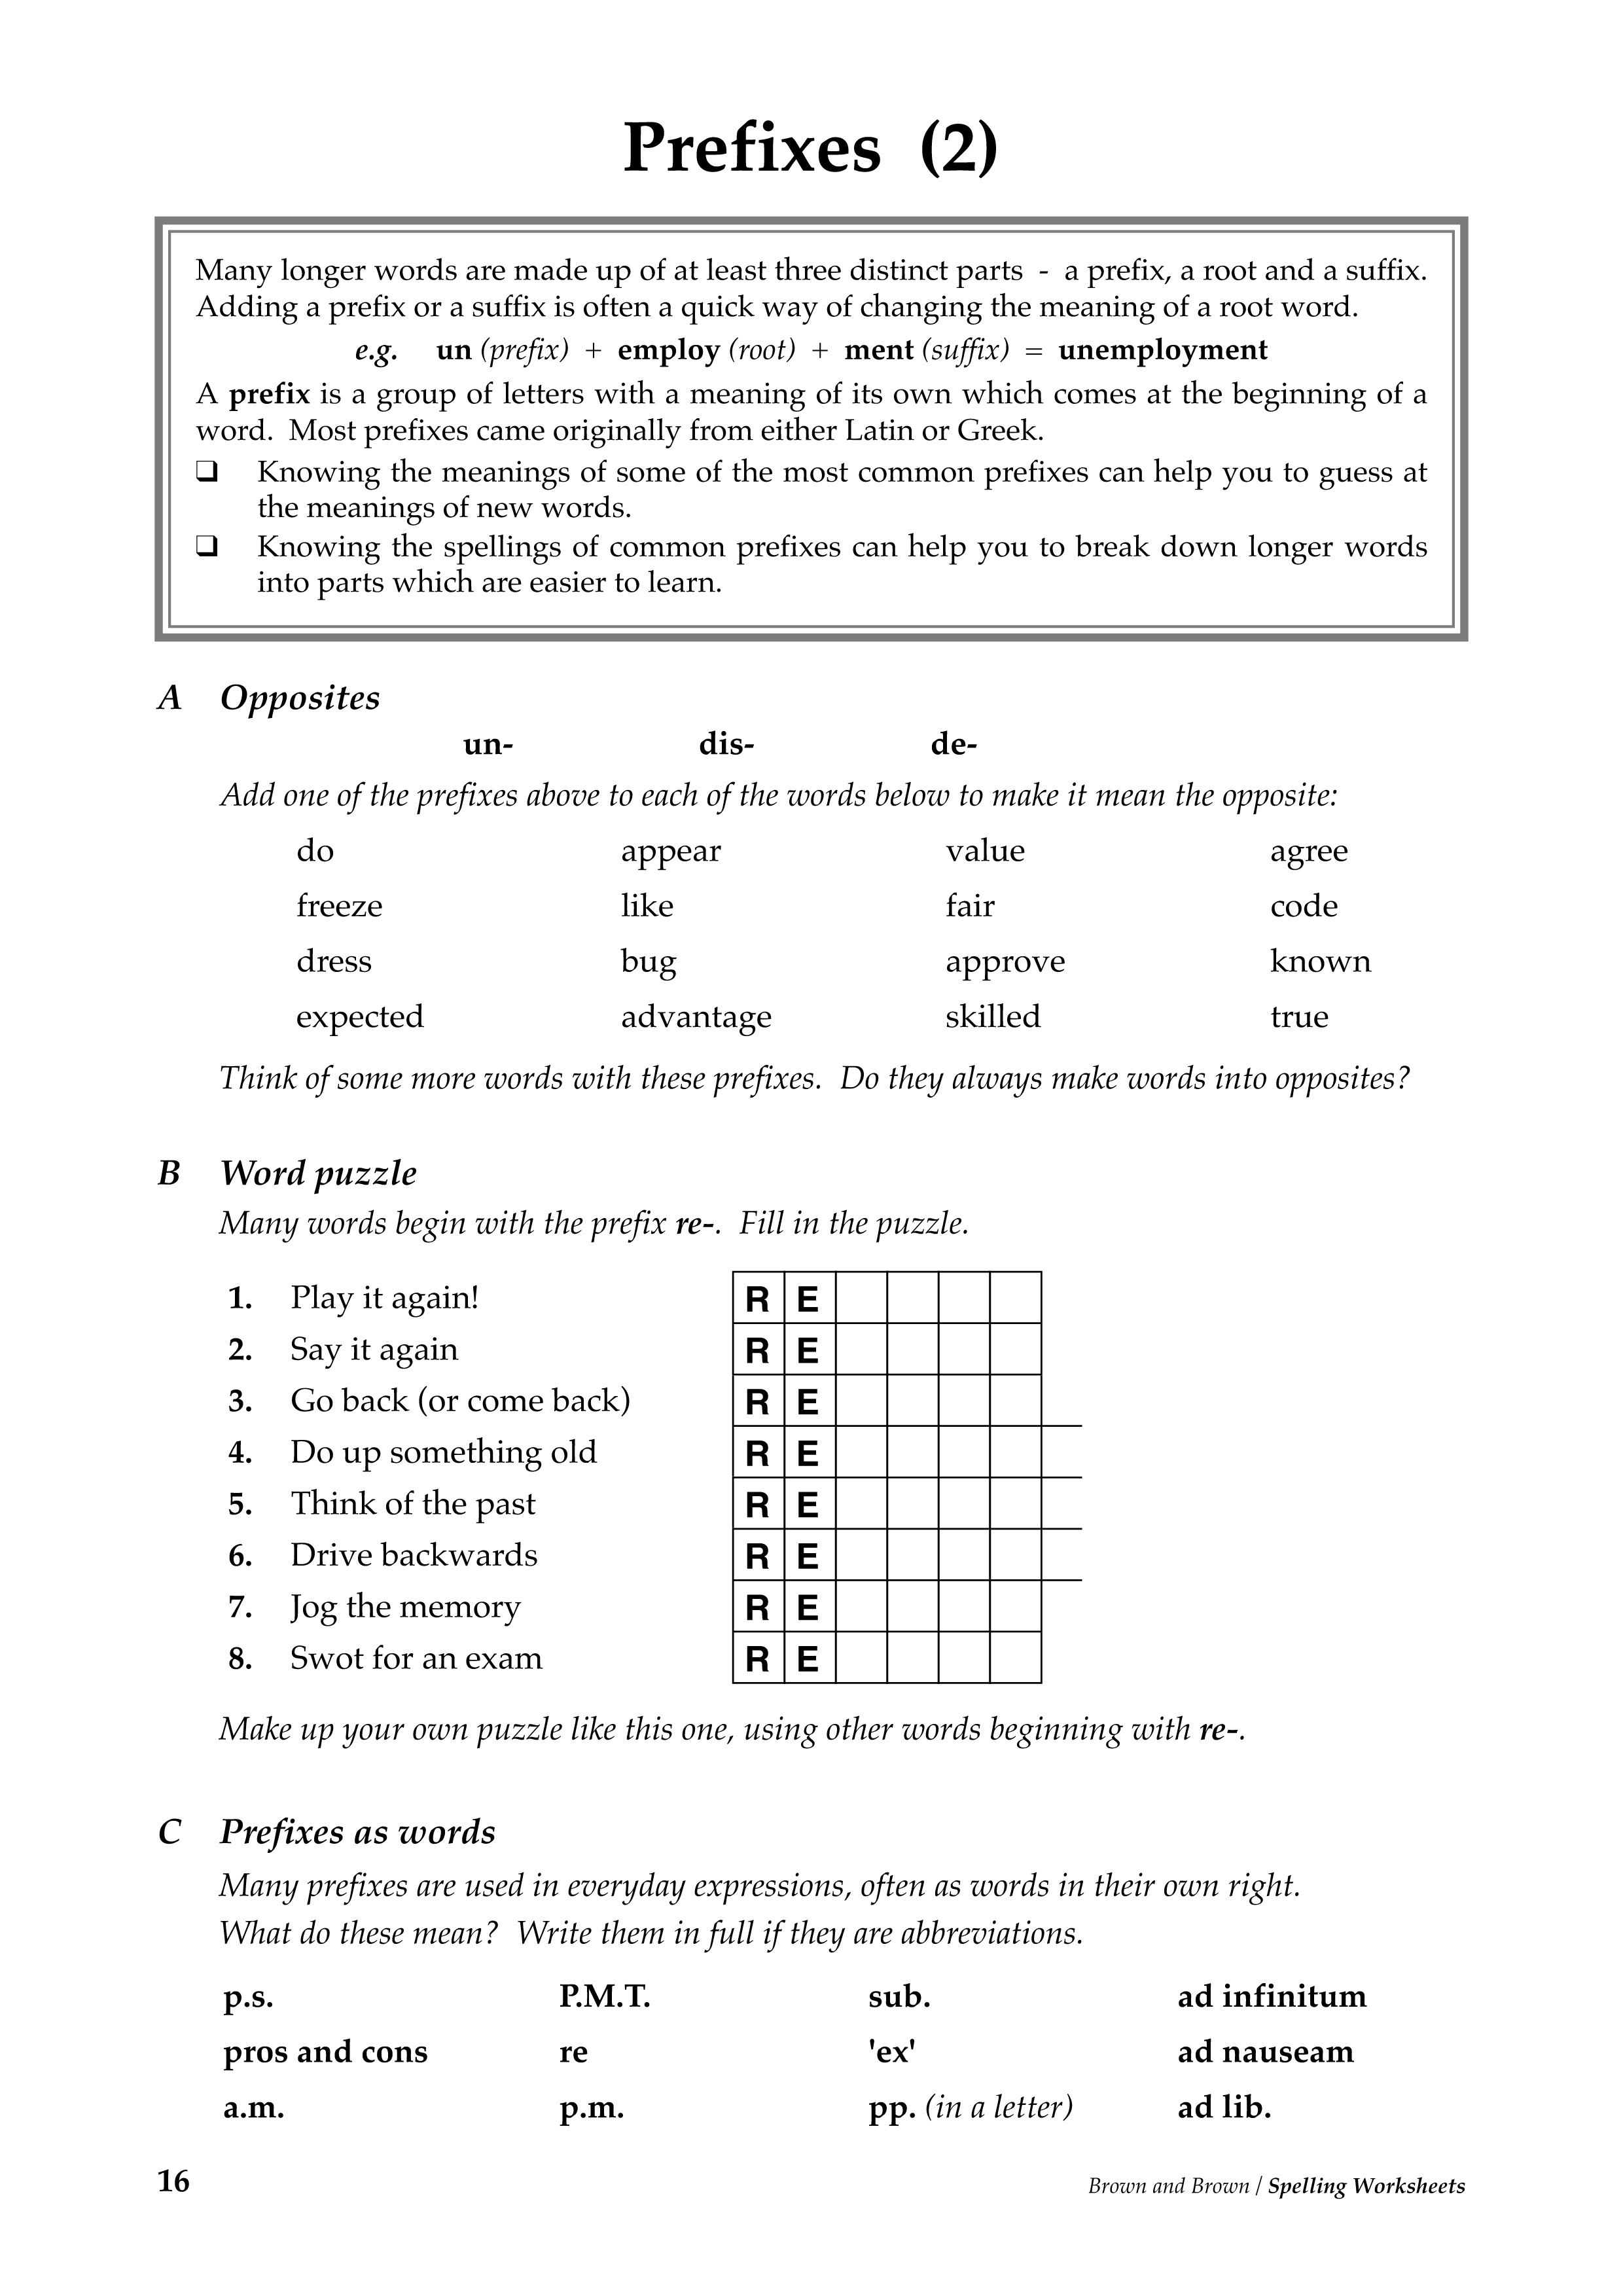 15 Best Images of Free Printable Dyslexia Worksheets - Dyslexia